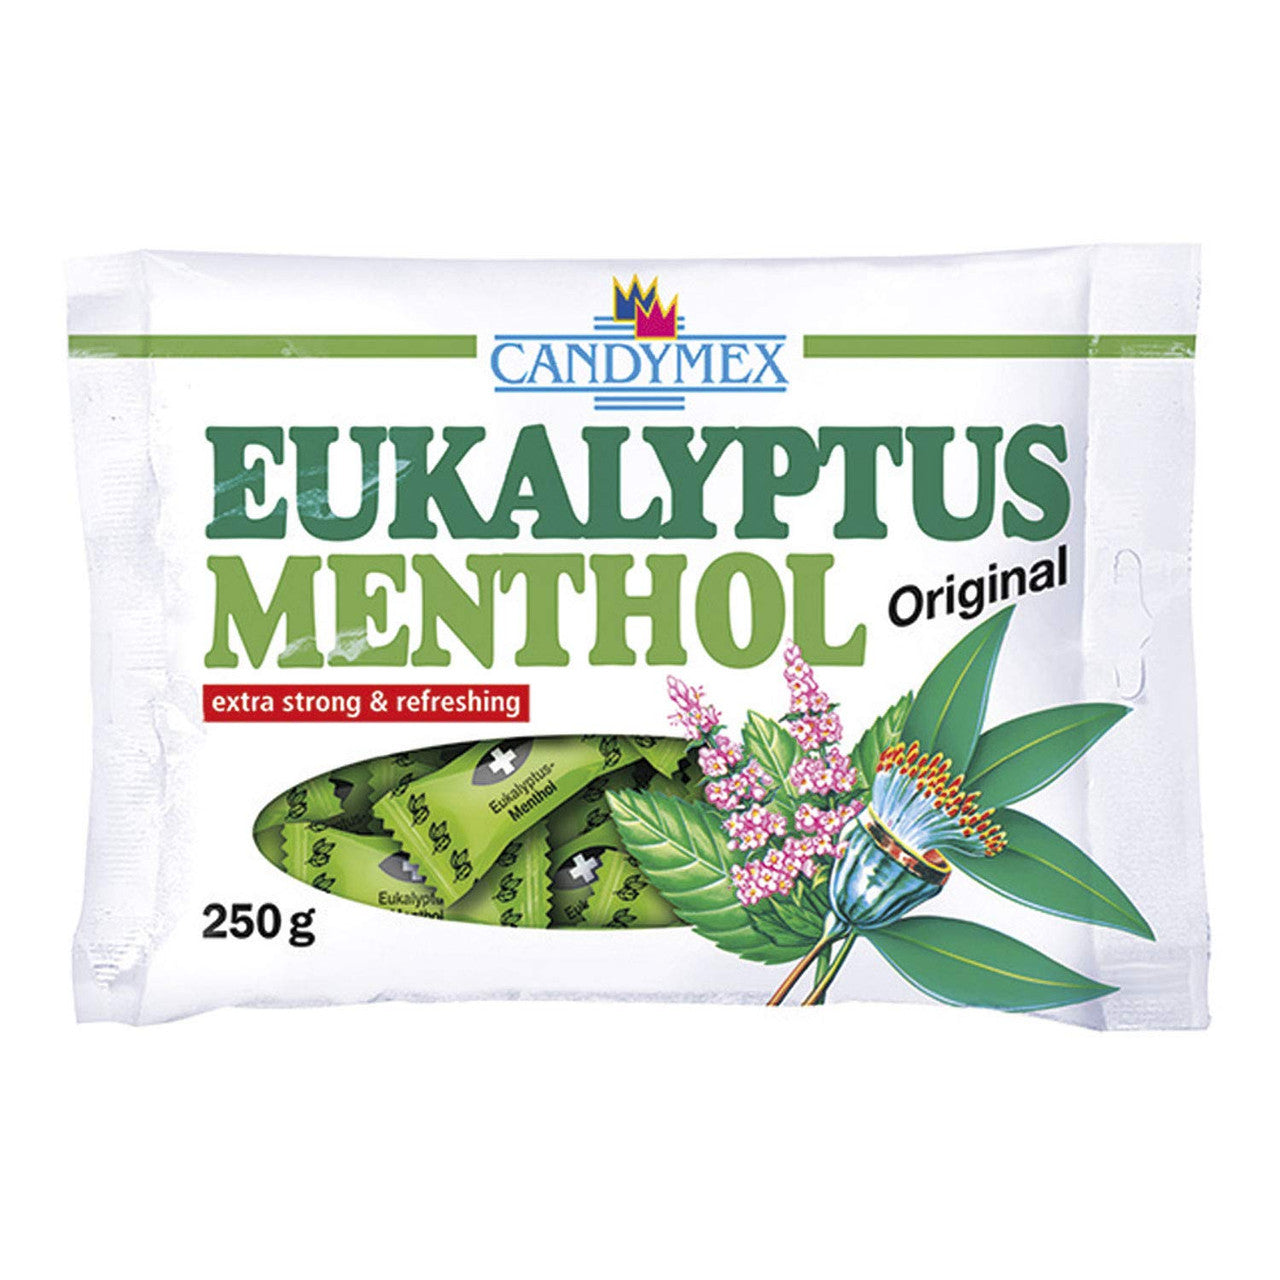 Candymex Original Menthol Eucalyptus Extra Strong and Refreshing 250g/8.8 oz. Bag {Imported from Canada}